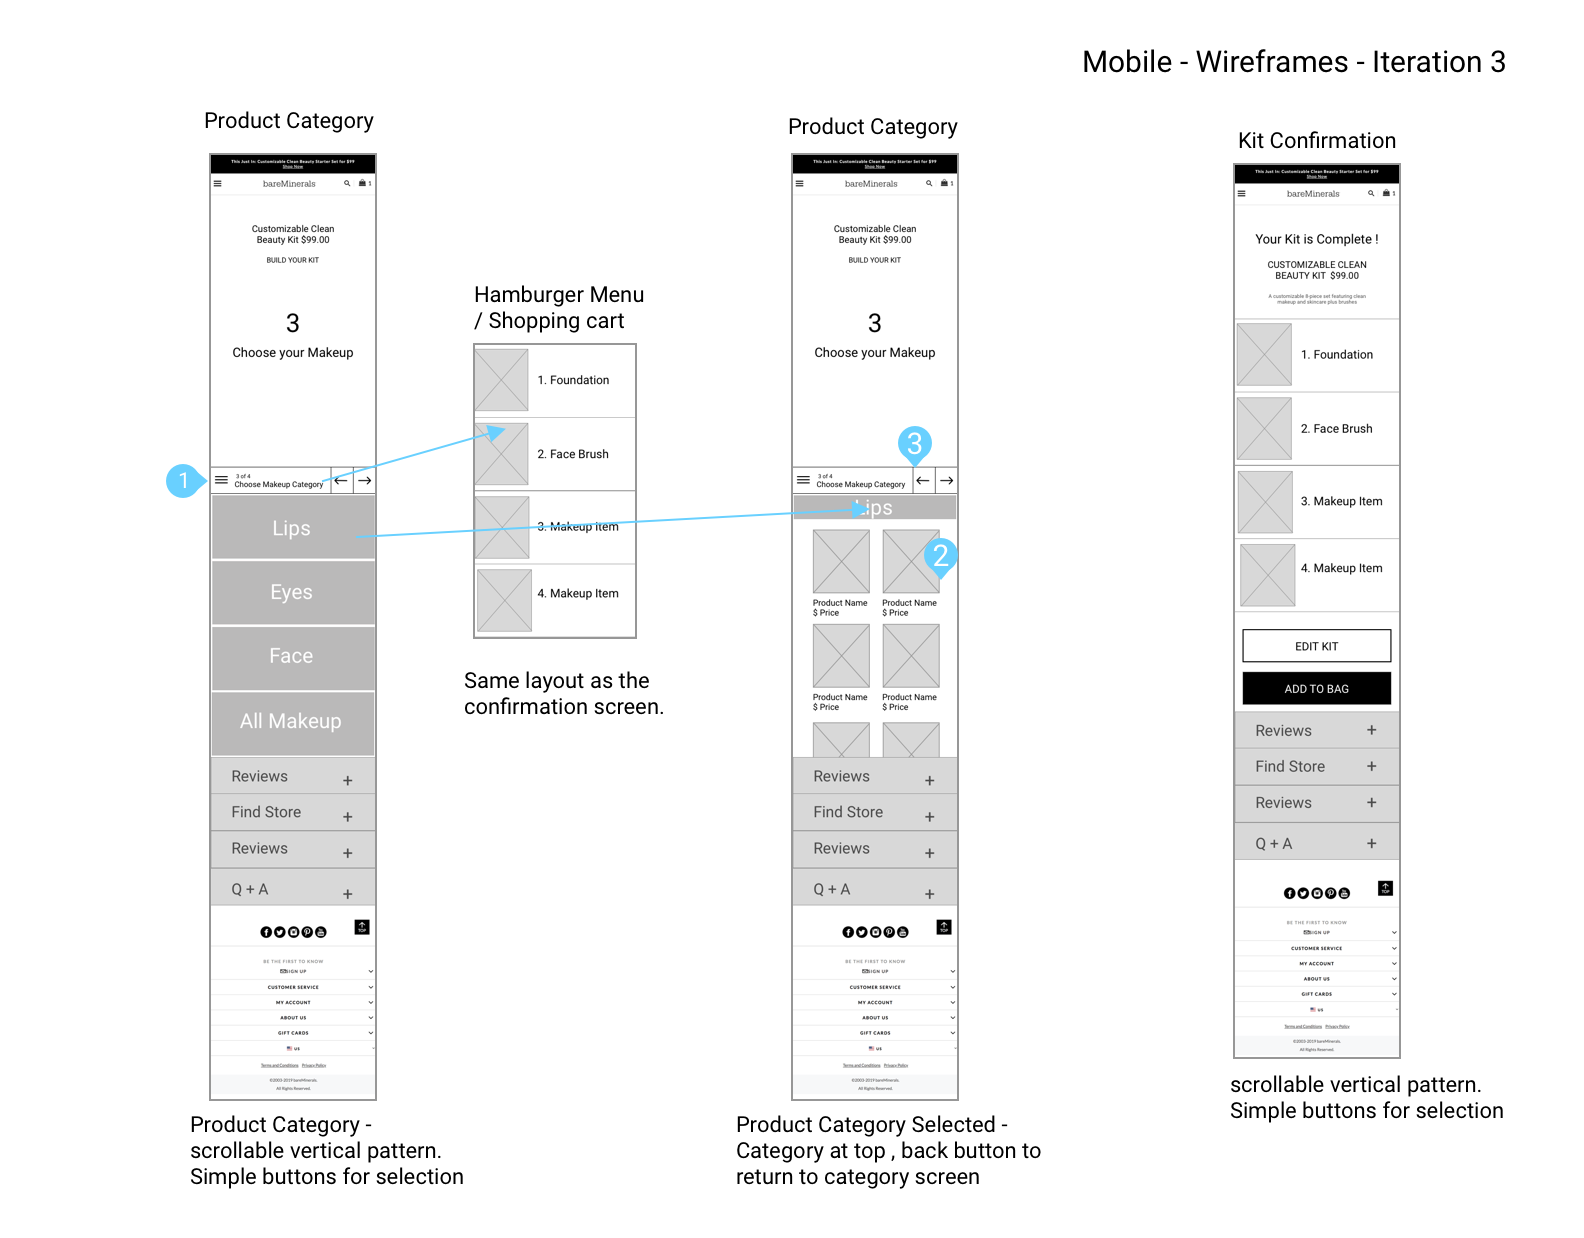 Bare Minerals - Mobile Wireframes - Iteration 3